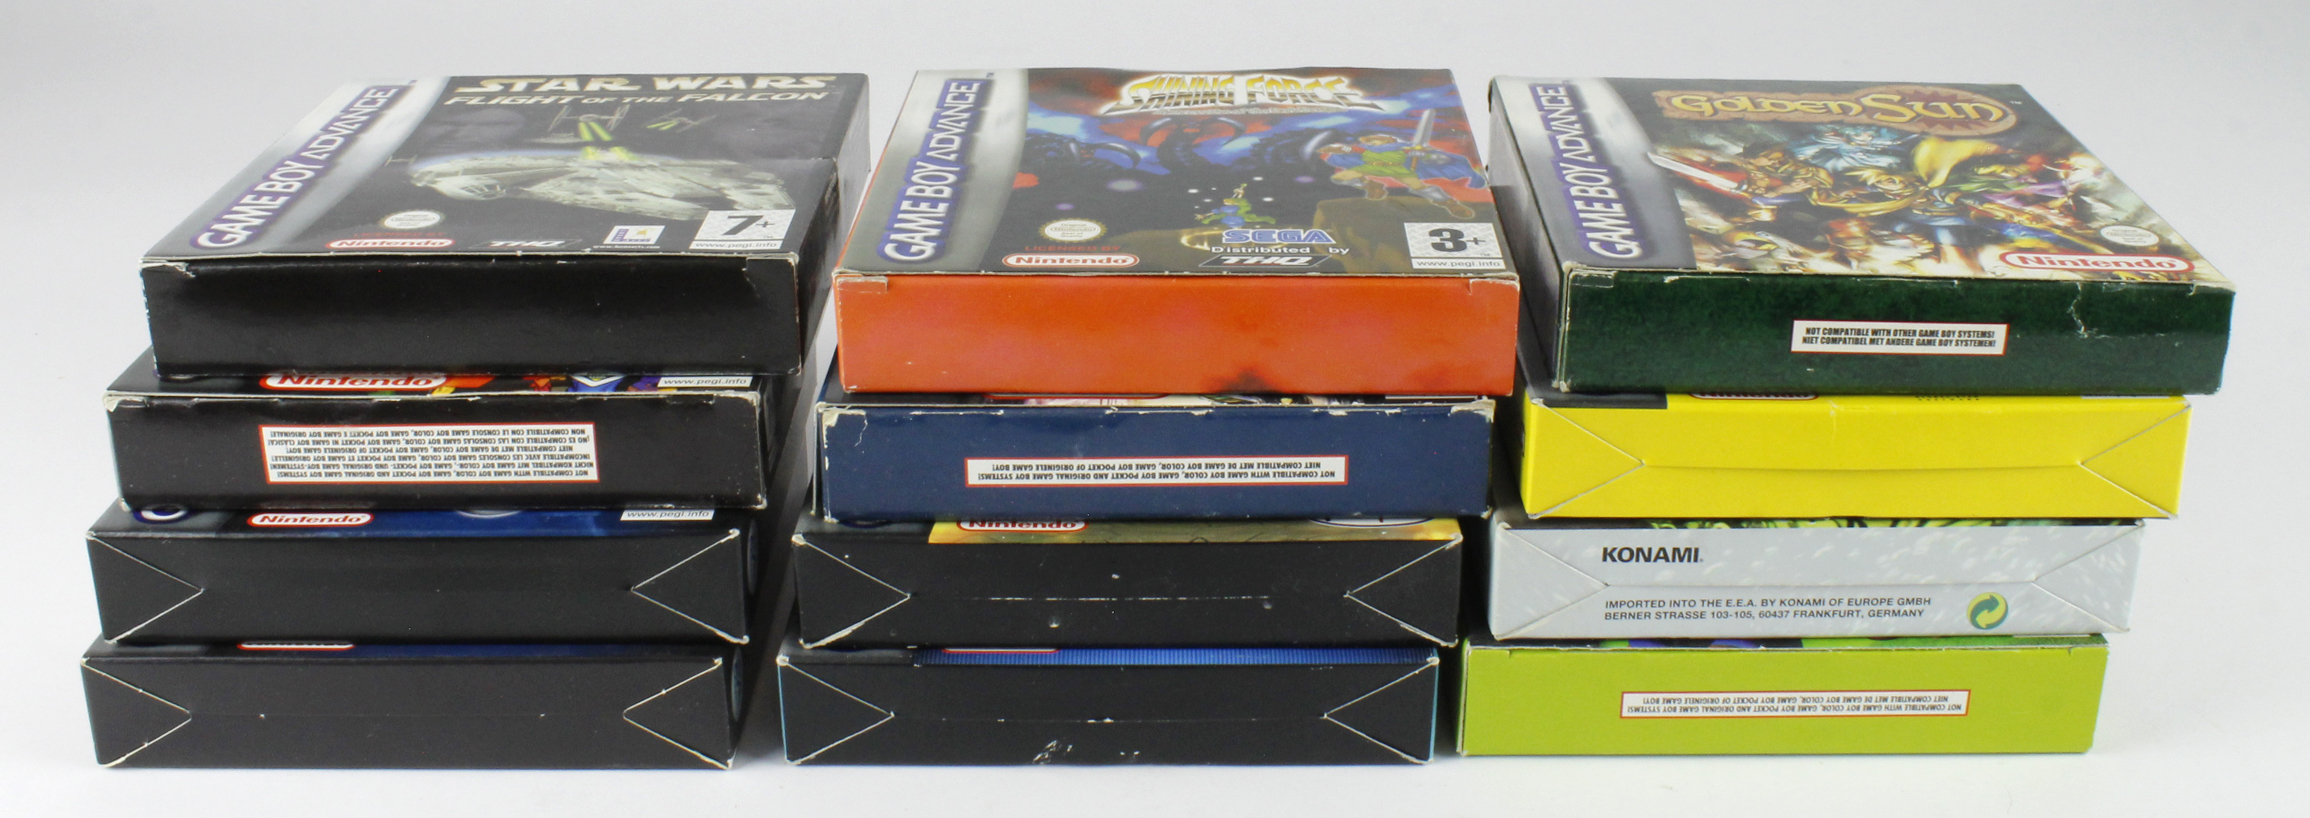 Gameboy Advance. Twelve boxed Gameboy Advance games, including Lord of the Rings (The Two Towers,